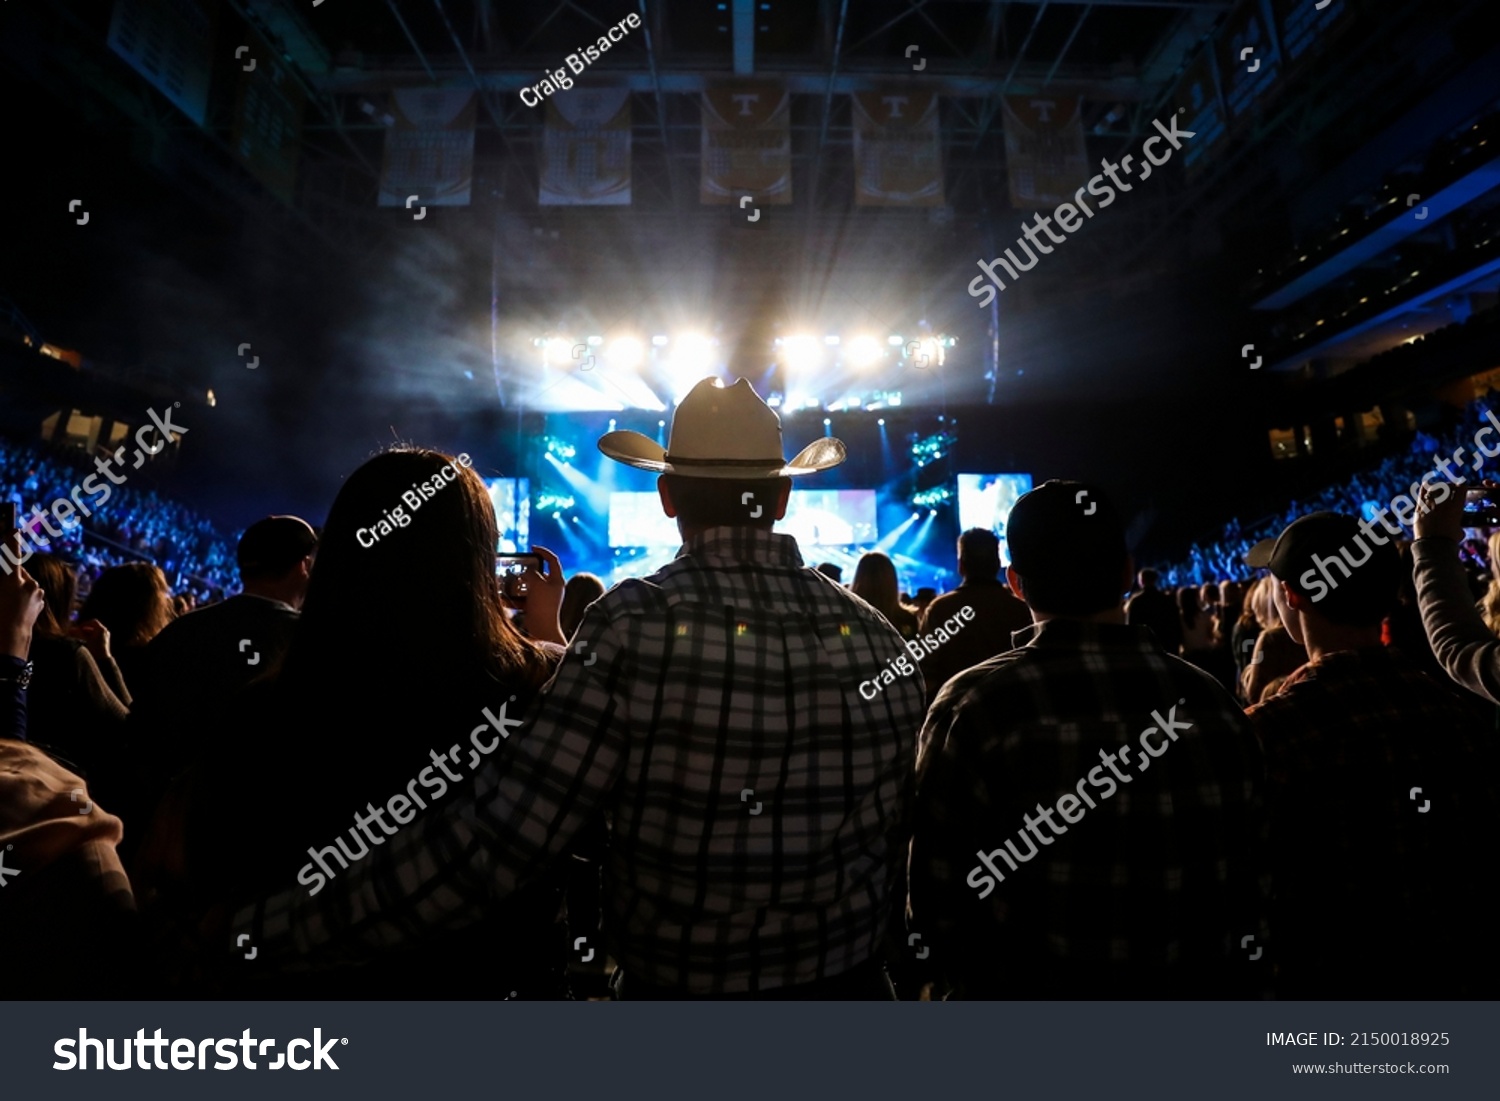 A country music fan watches a live concert wearing a cowboy hat. #2150018925